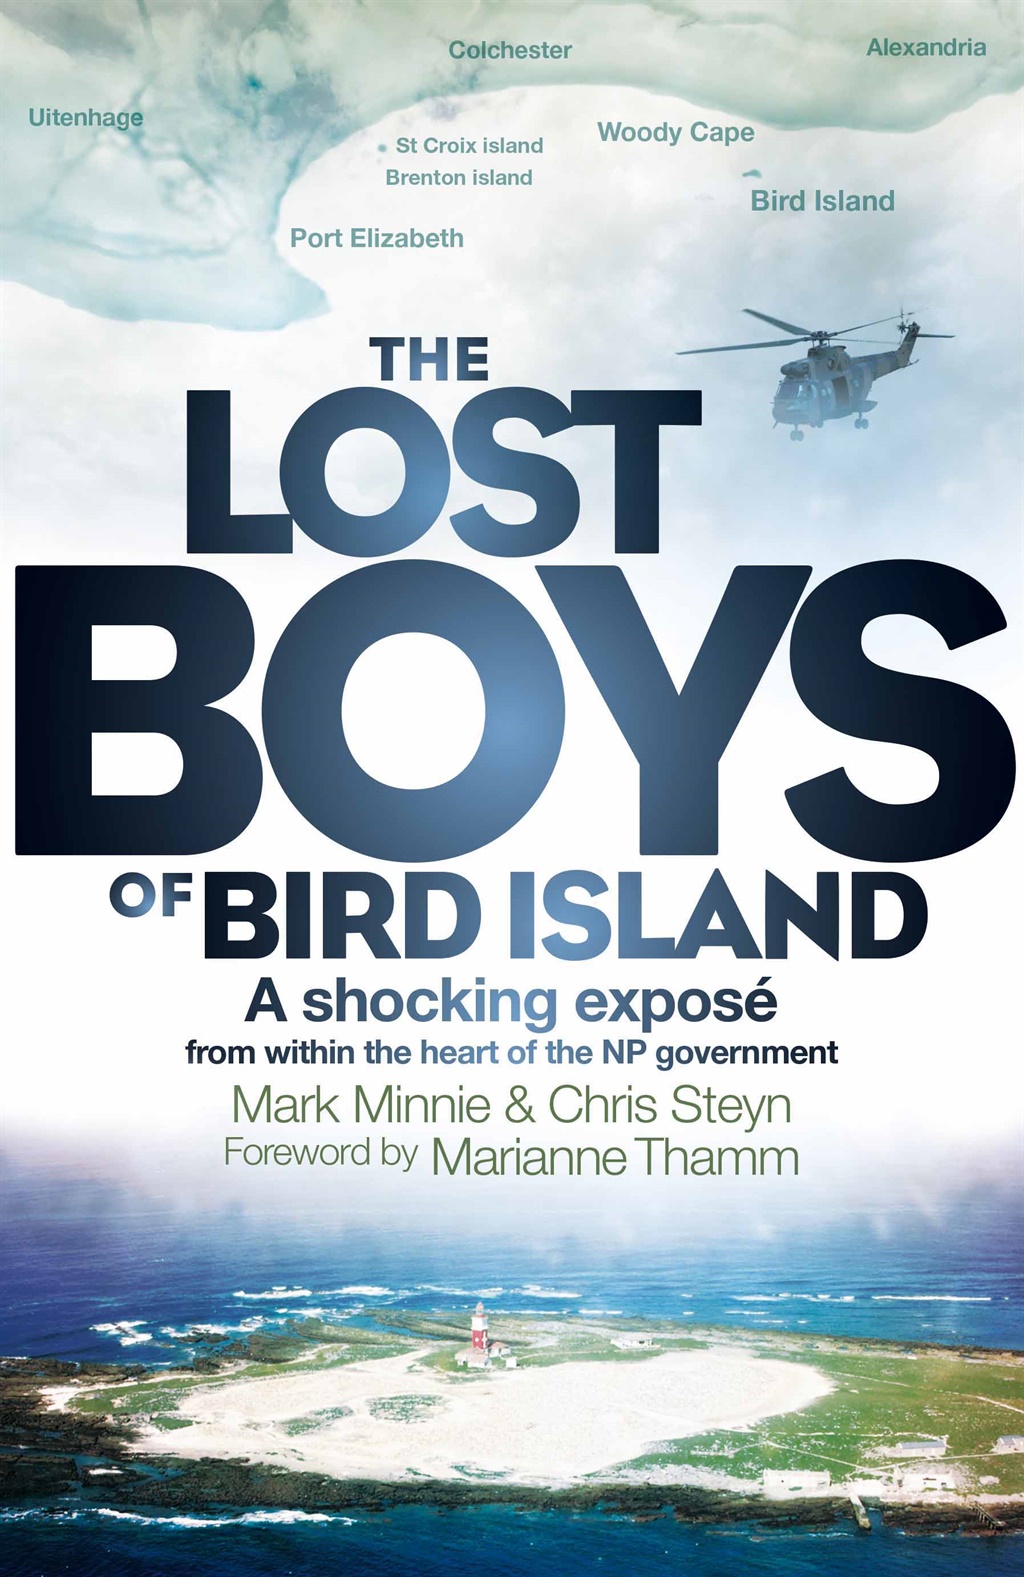 The Lost Boys of Bird Island by Tafelberg Publishers.